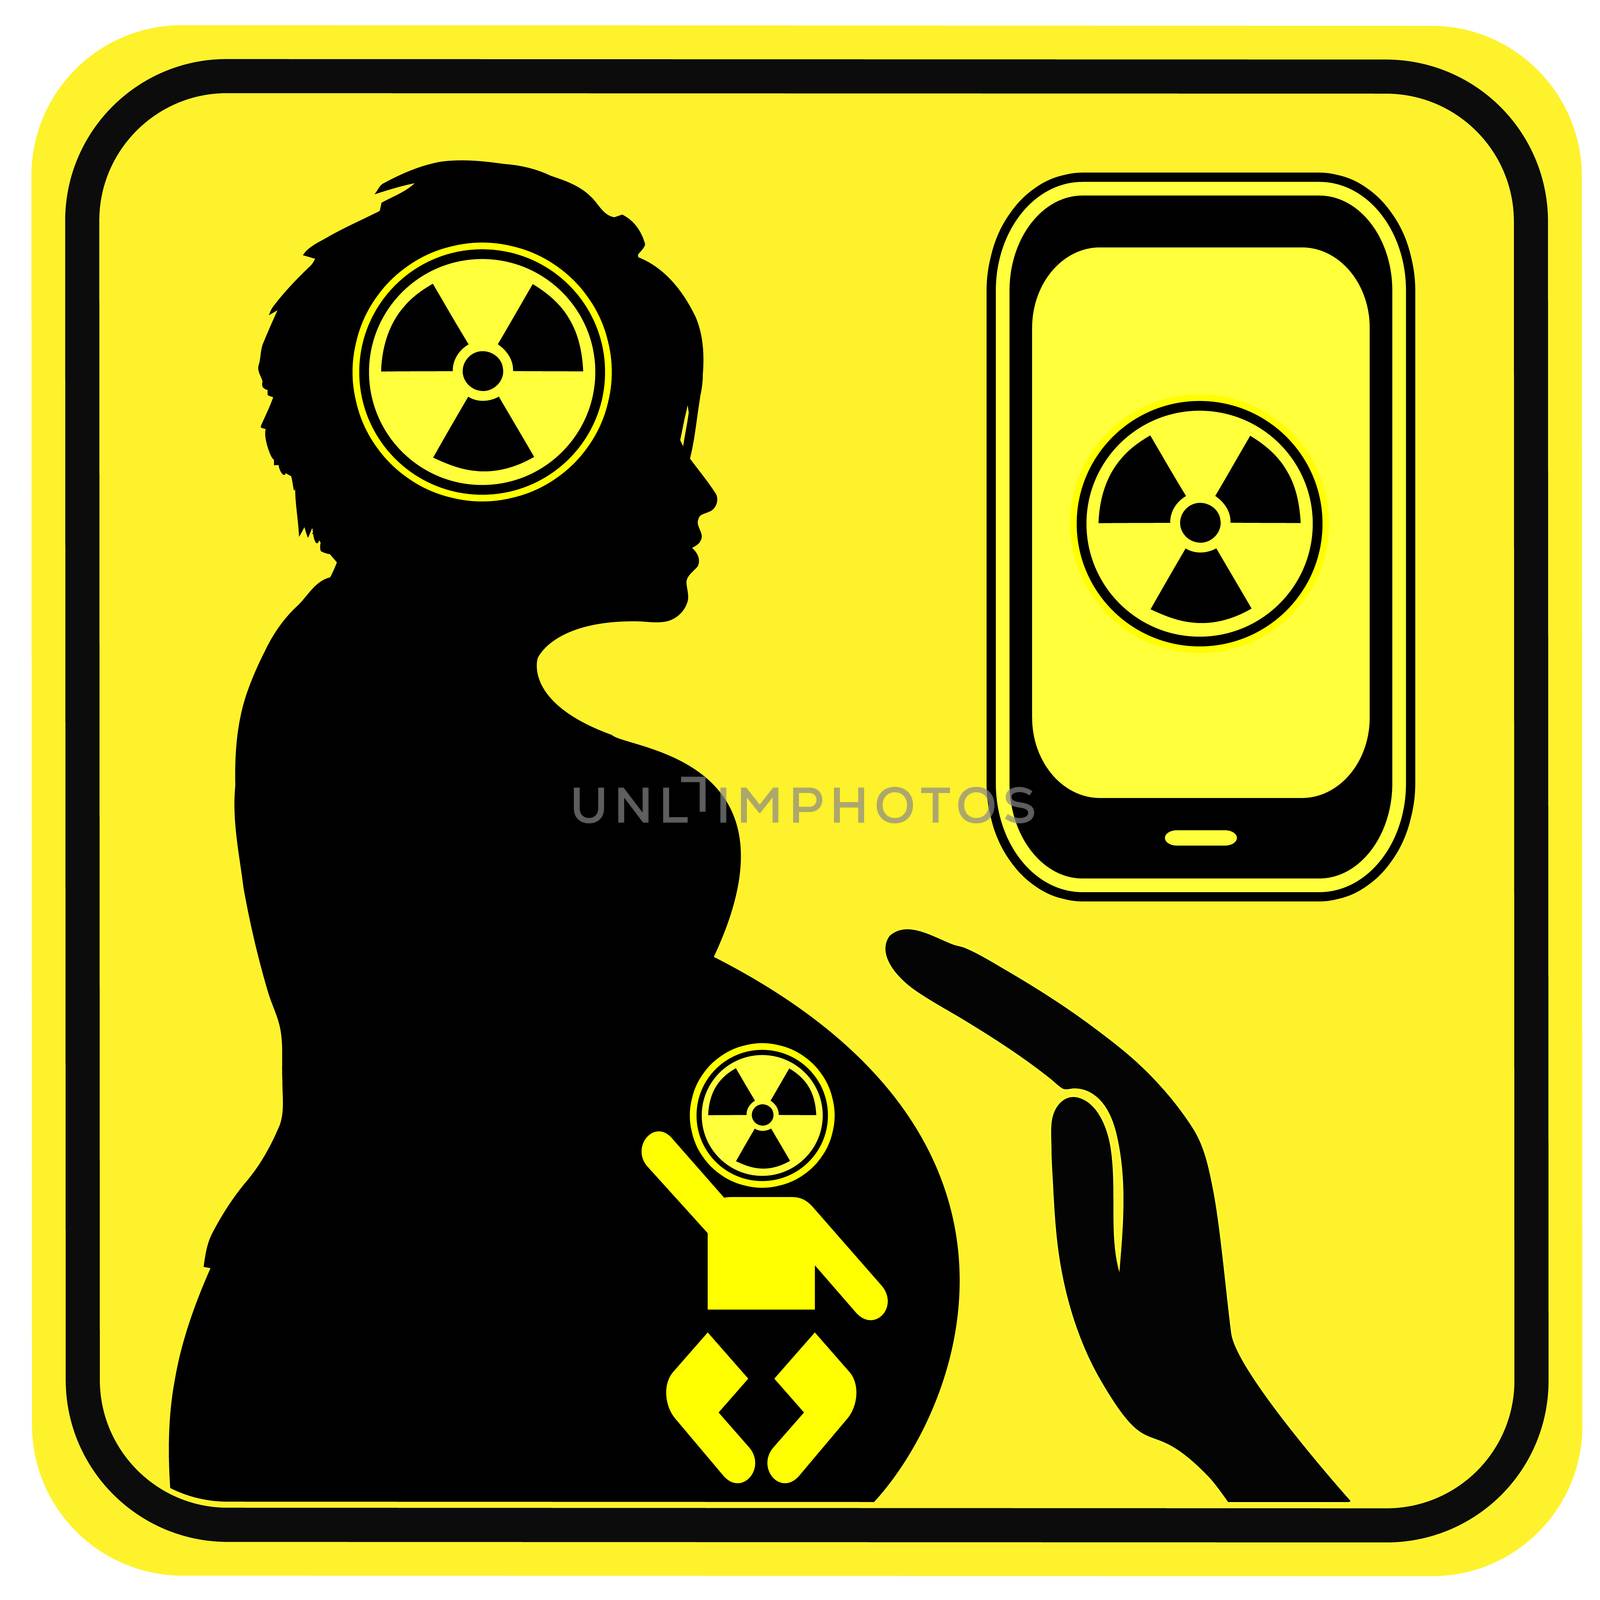 Radiation from Smartphone can harm the brain of the unborn